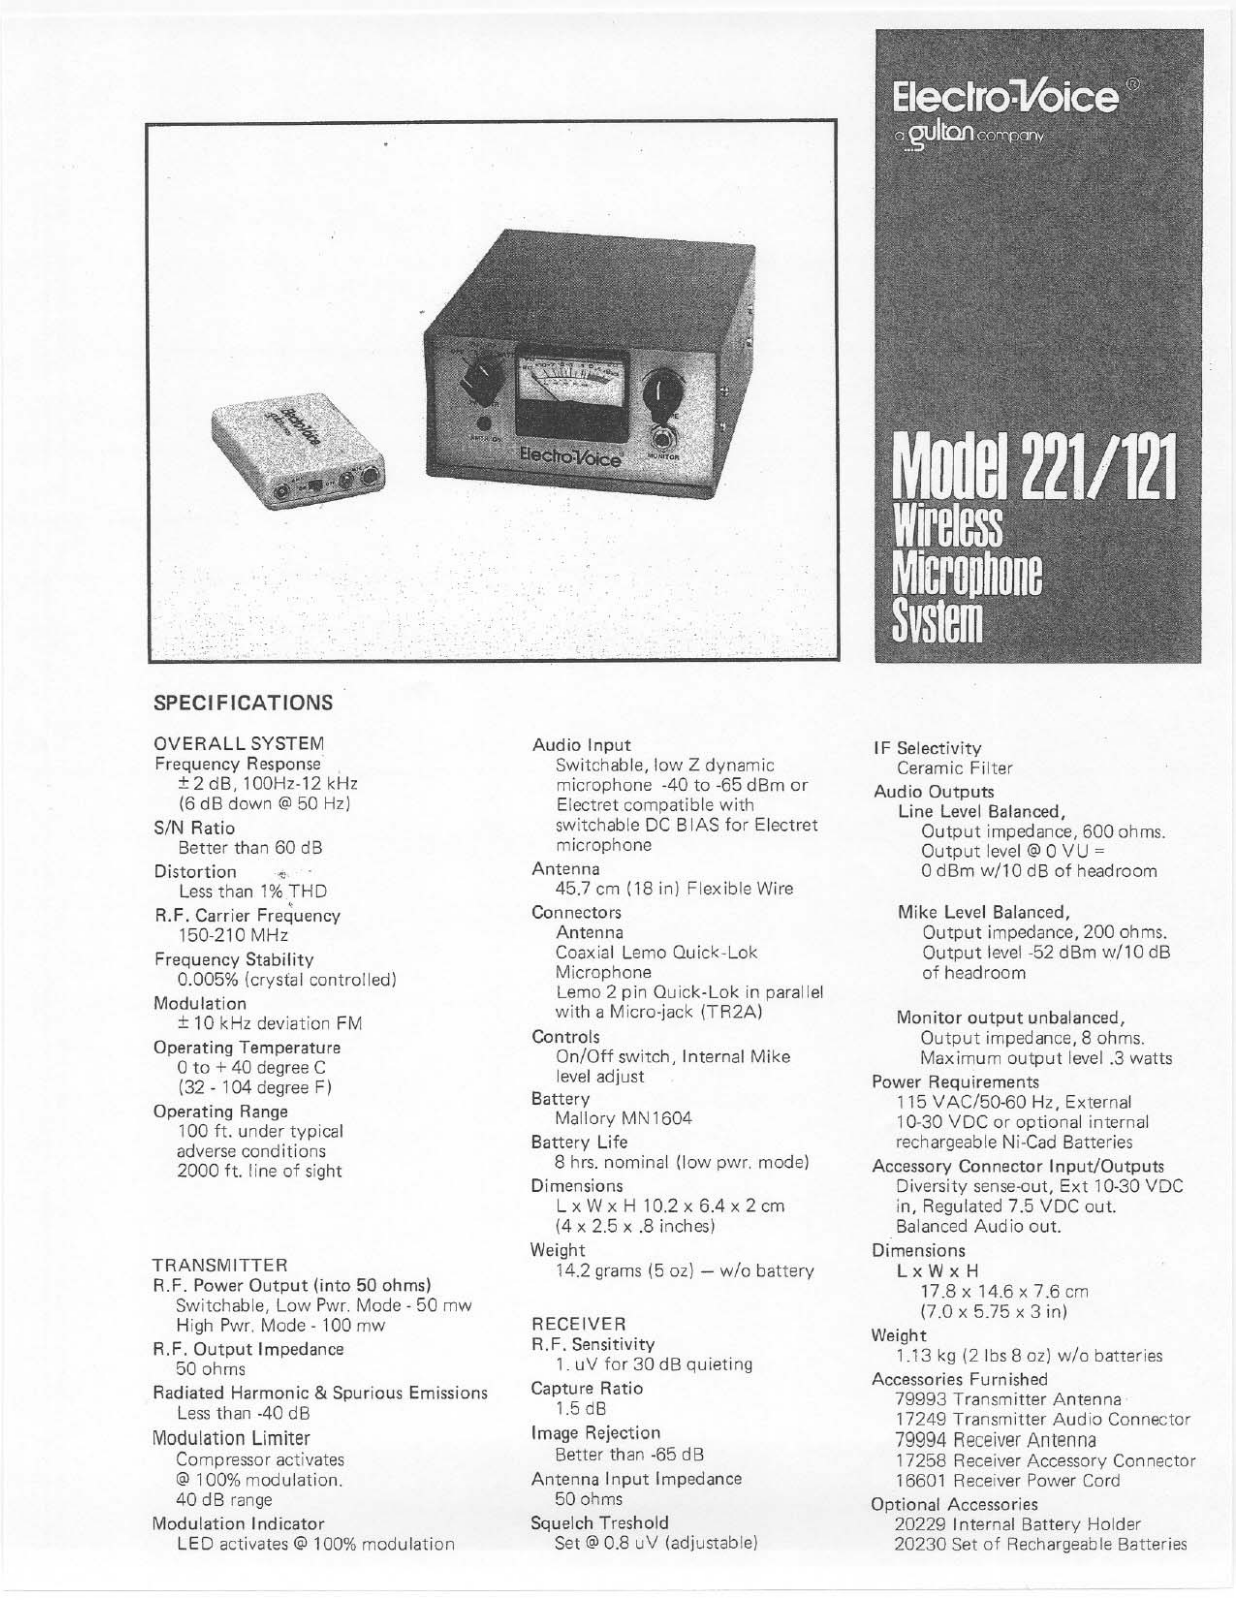 Electro-voice 221, 121 specification and instructions